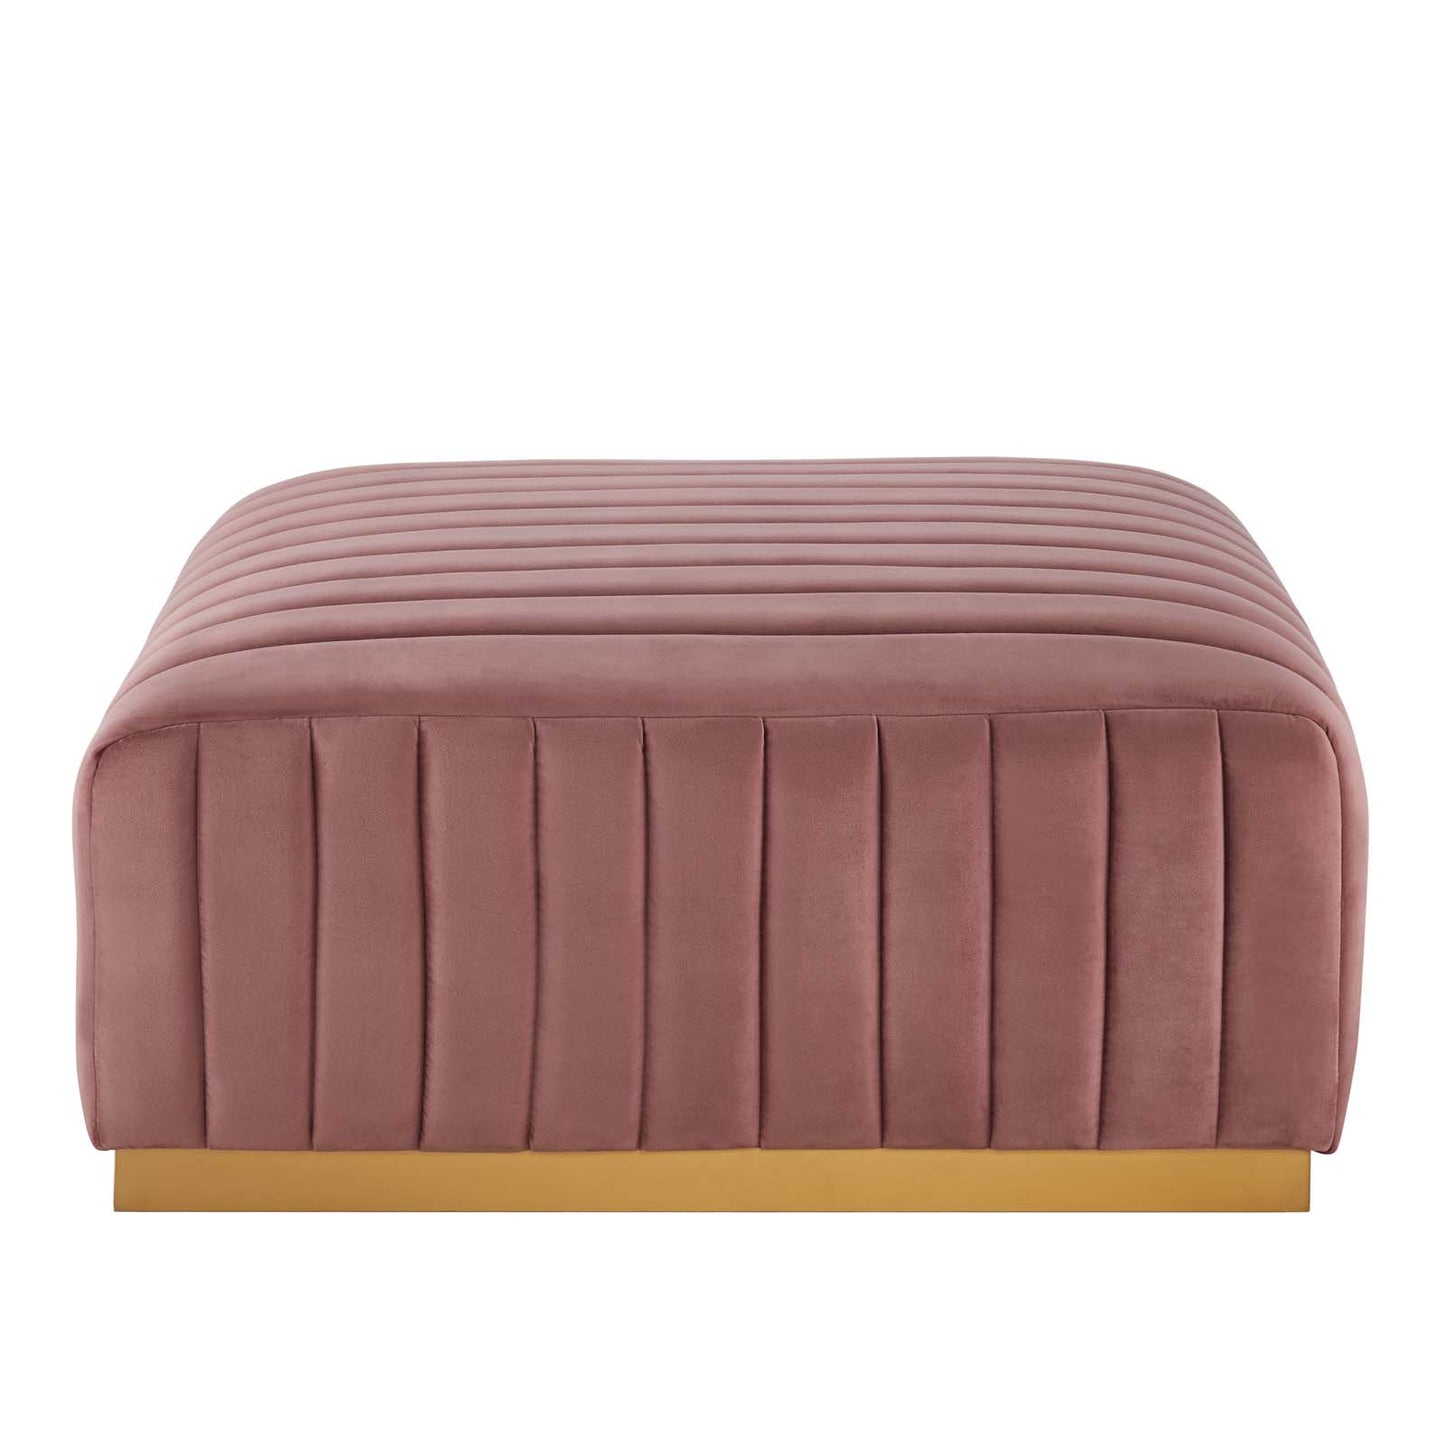 Conjure Channel Tufted Performance Velvet Ottoman Gold Dusty Rose EEI-5507-GLD-DUS